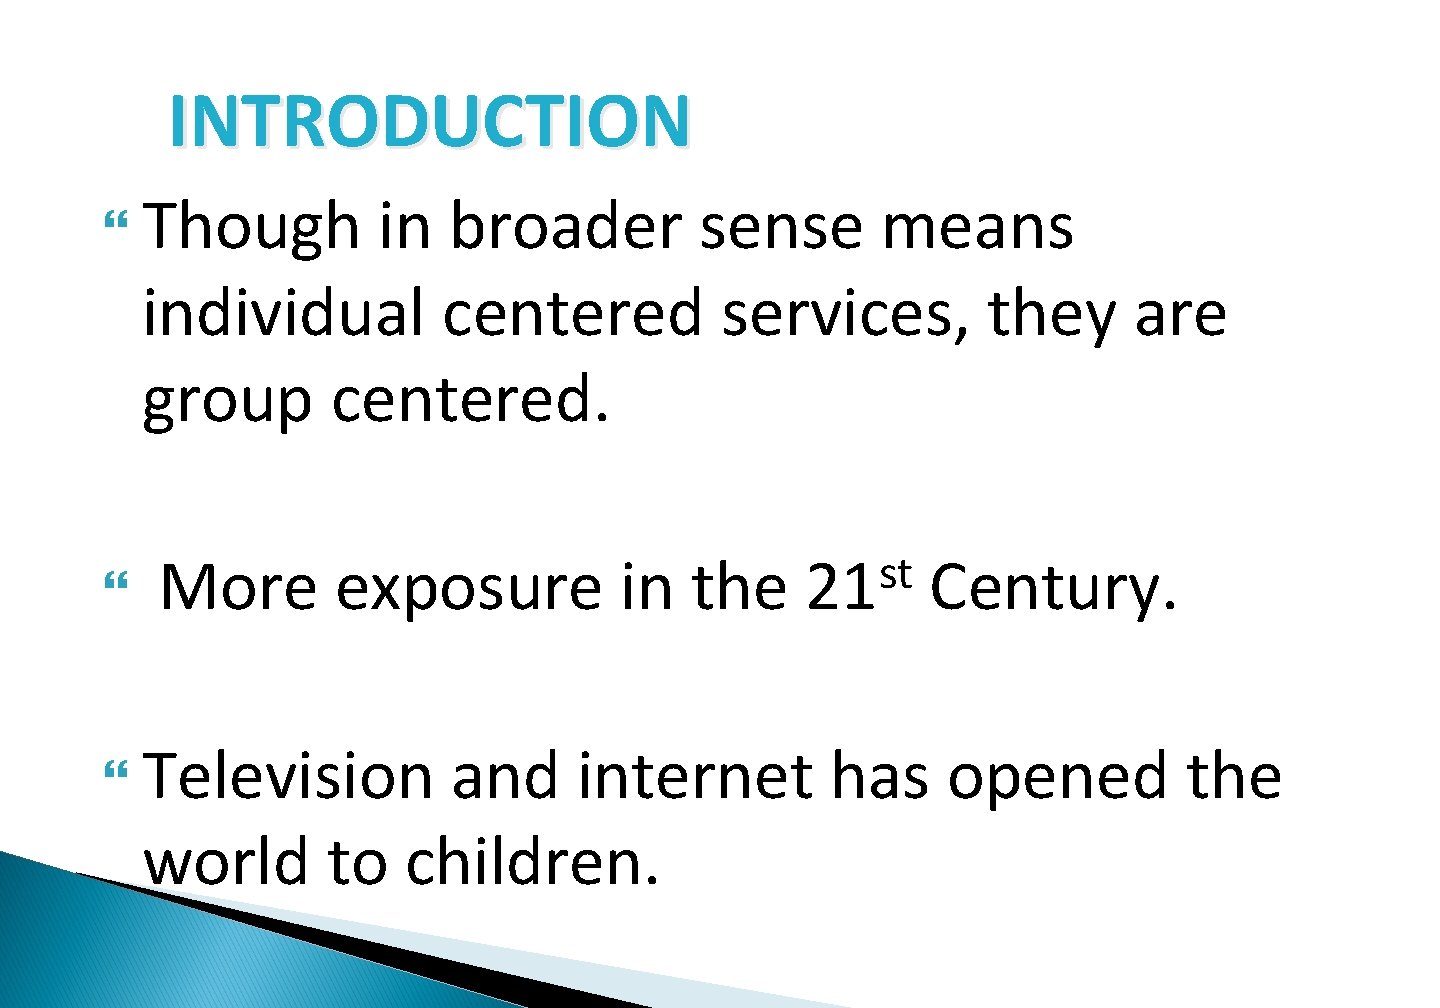 INTRODUCTION Though in broader sense means individual centered services, they are group centered. More